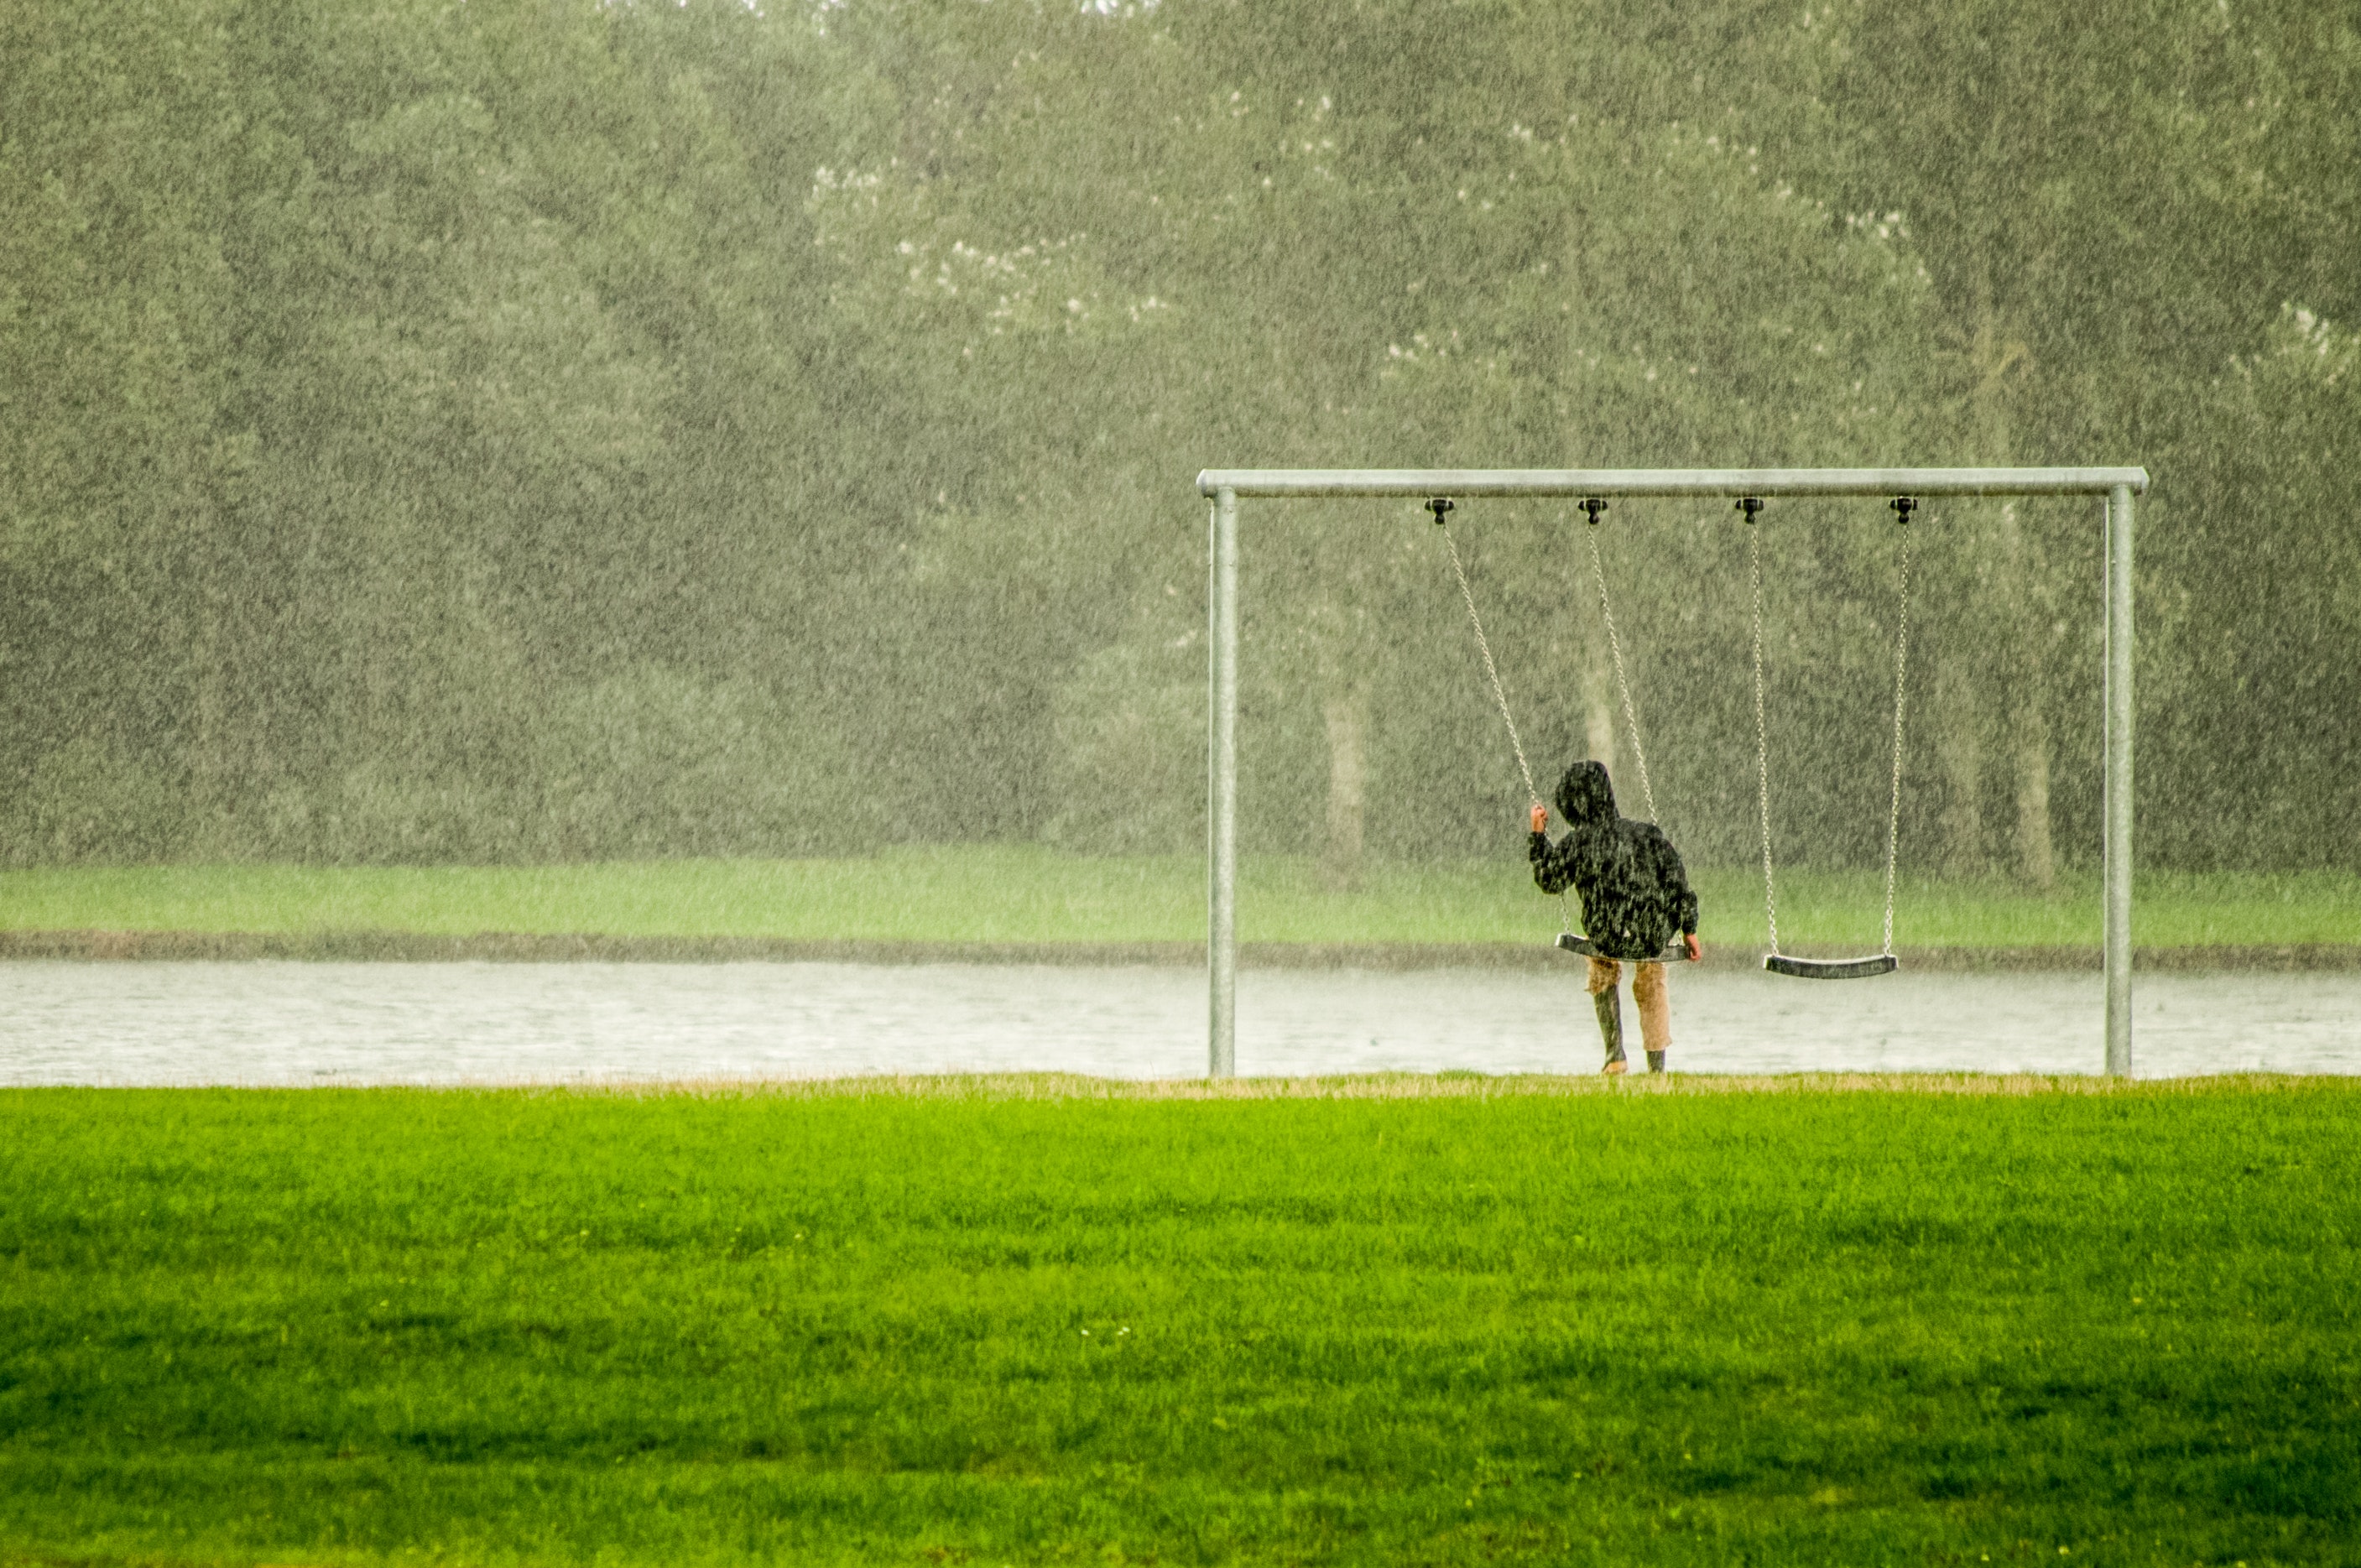 Person in black hoodie riding swing while raining photo